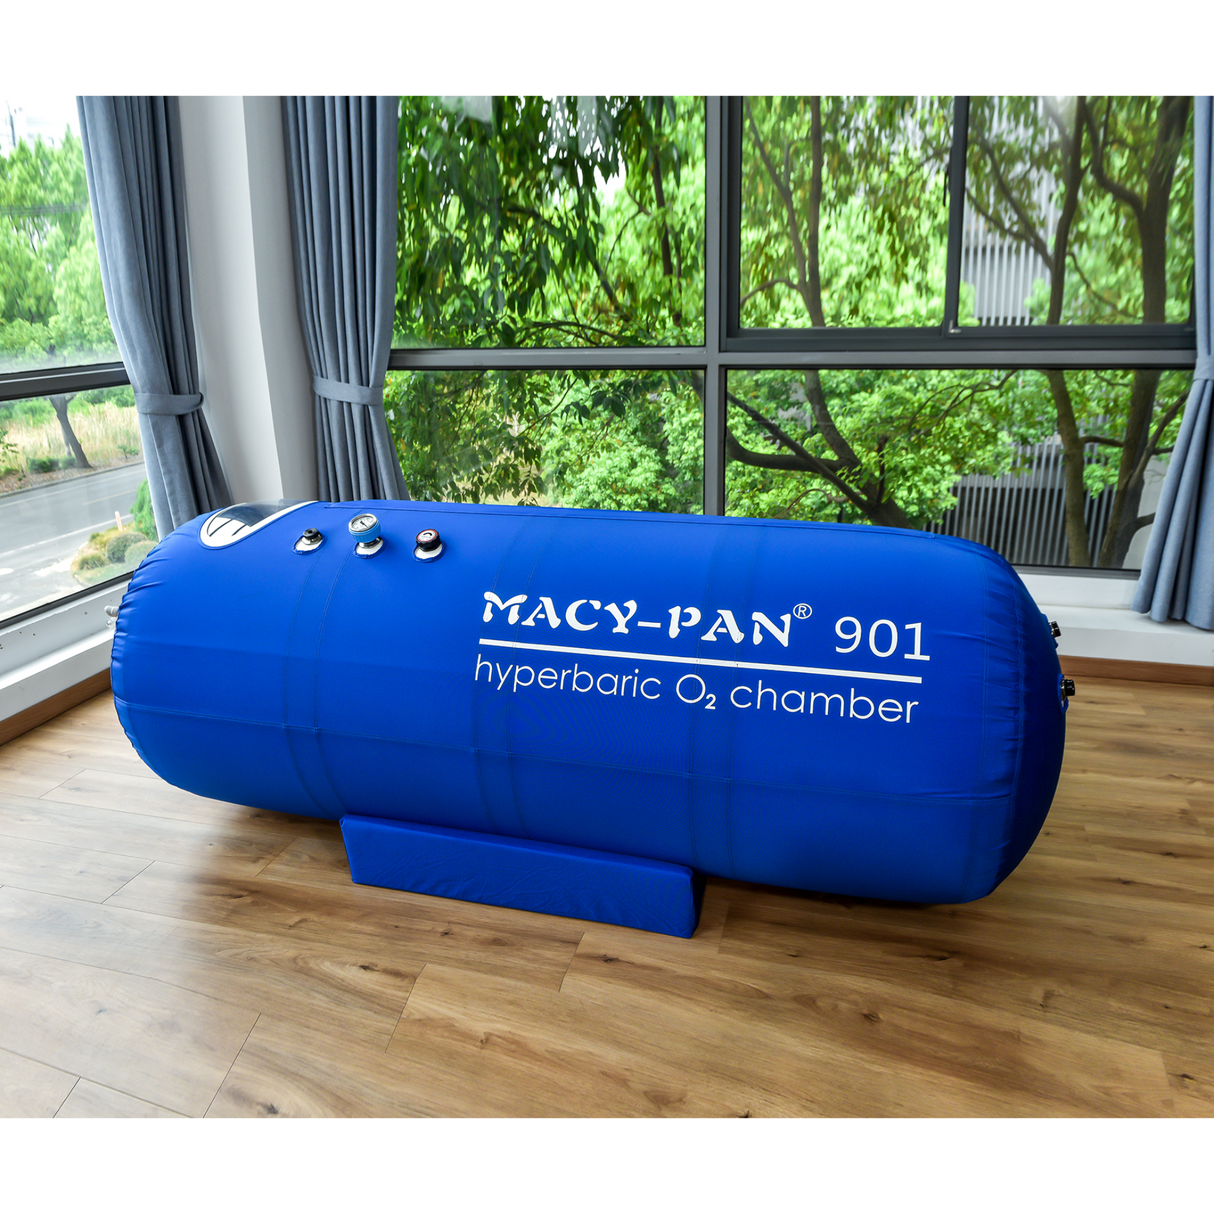 Macy-Pan Hyperbaric Oxygen Therapy Chamber Soft Lying Type - ST901